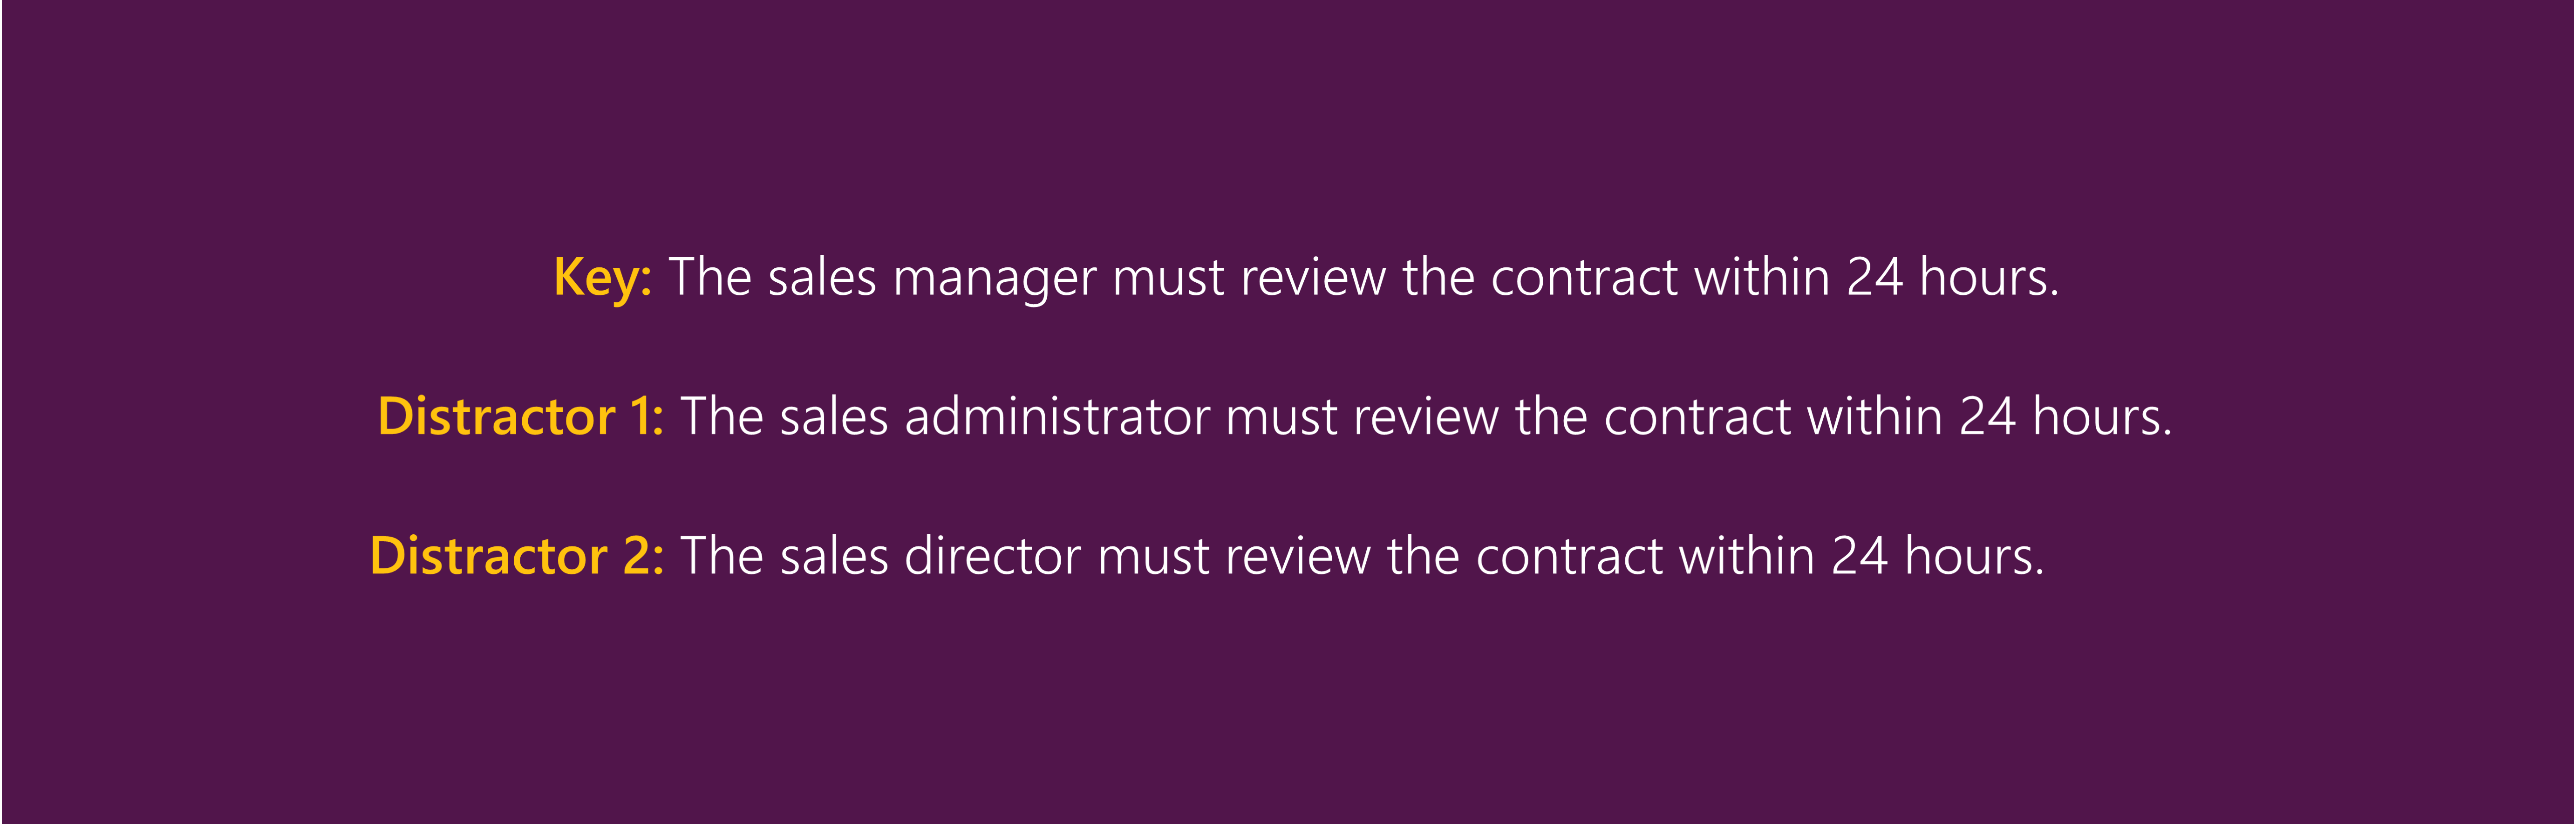 Key: The sales manager must review the contract within 24 hours. Distractor 1: The sales administrator must review the contract within 24 hours. Distractor 2: The sales director must review the contract within 24 hours.